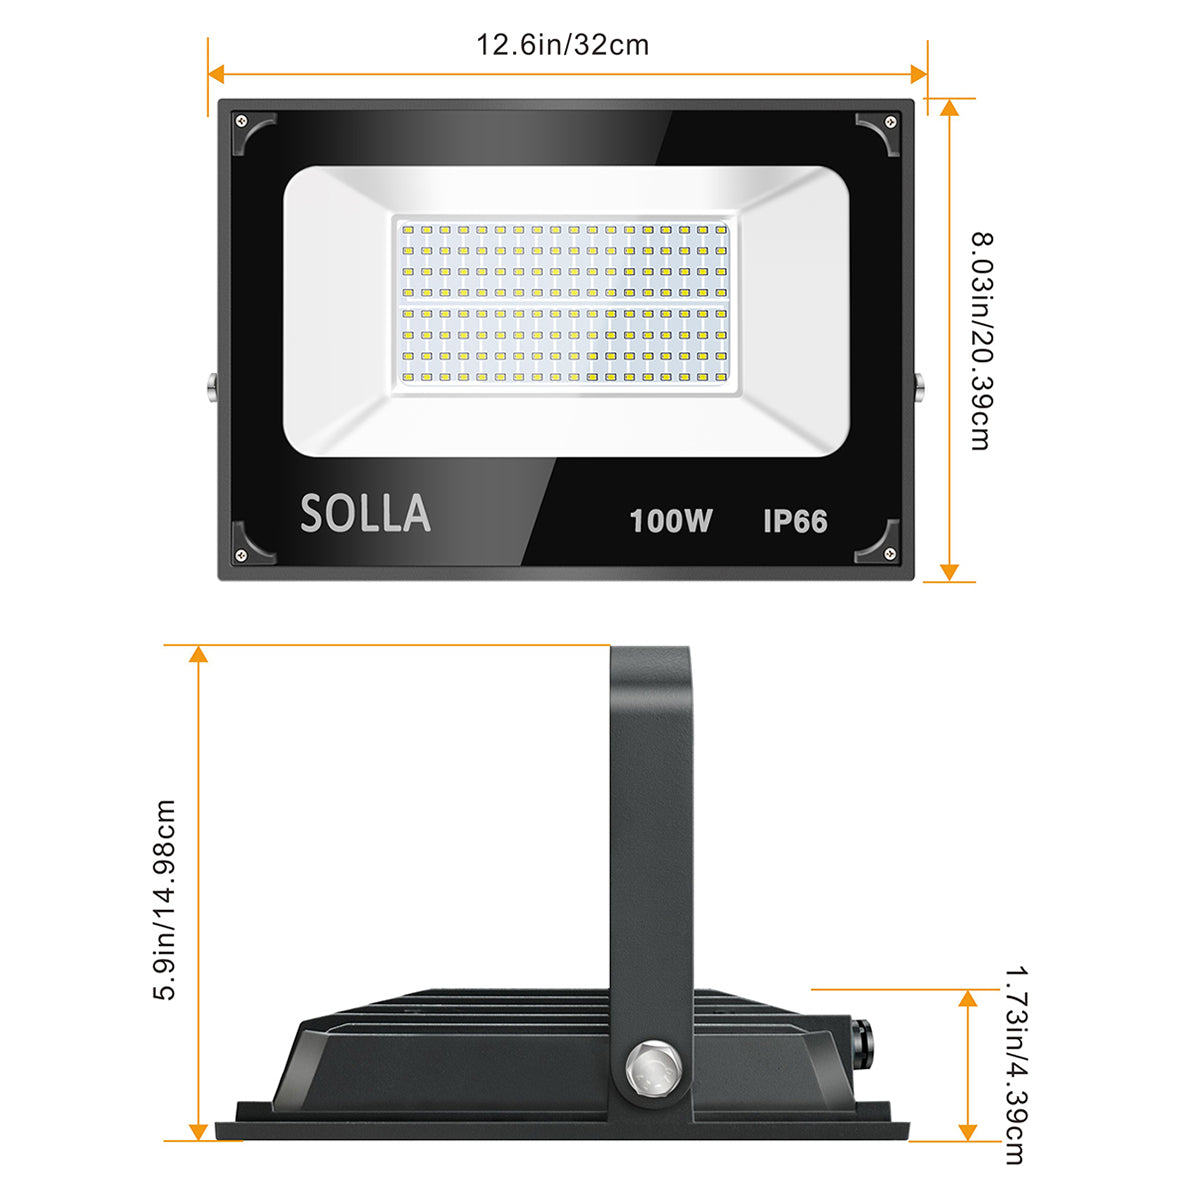 LED Flood Light IP66 Waterproof, 50W 100W 150W 200W, 300W,400W,500W,600W 1 Pack and 2 Pack